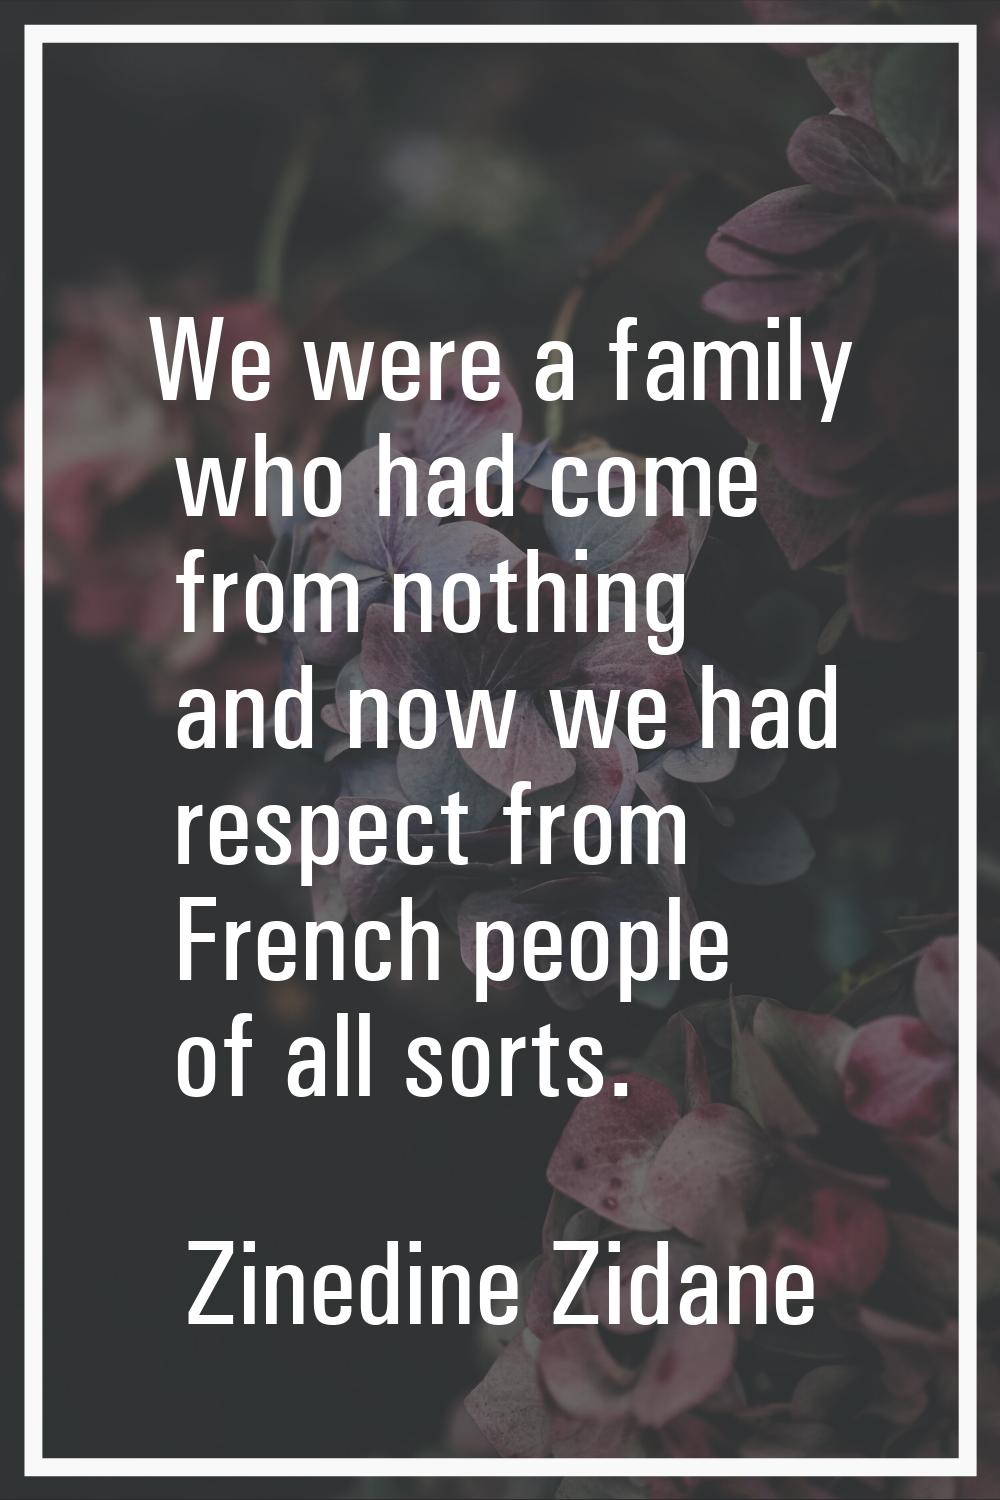 We were a family who had come from nothing and now we had respect from French people of all sorts.